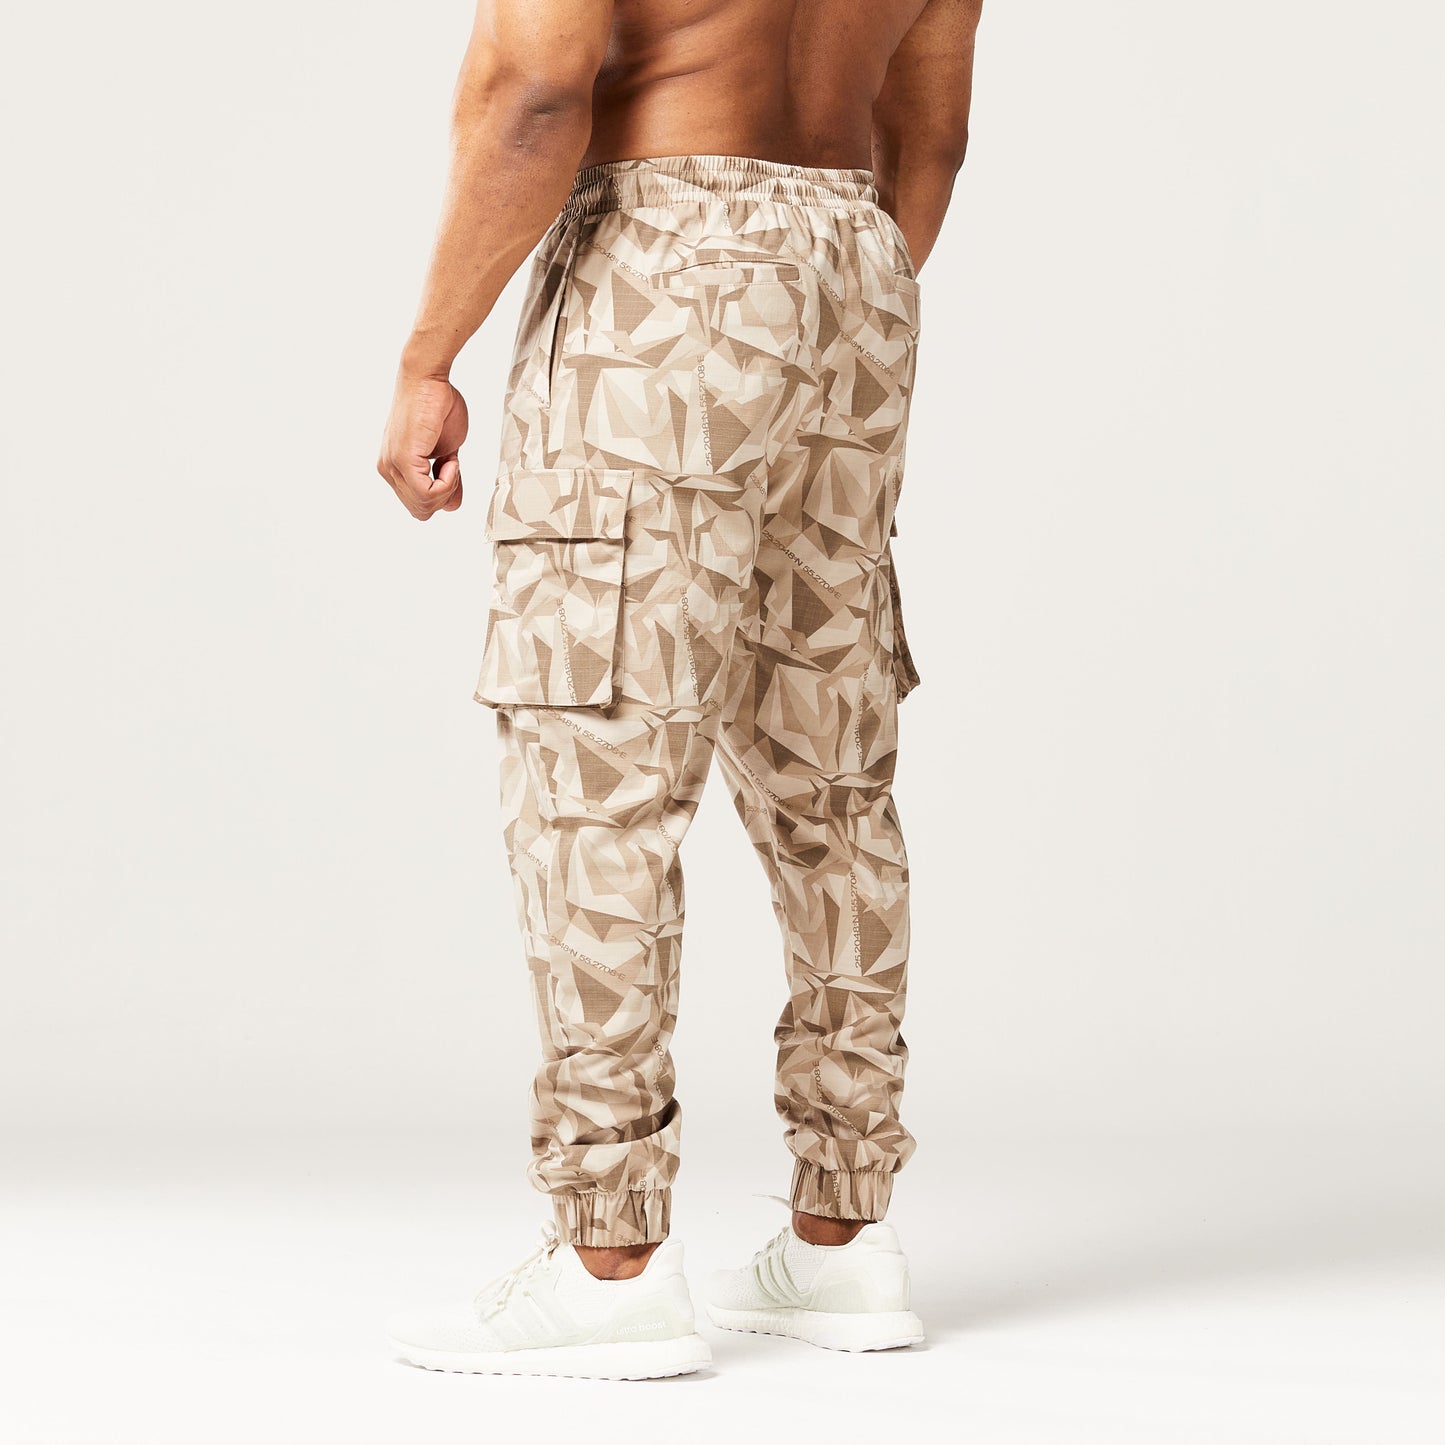 squatwolf-gym-wear-code-camo-cargo-pants-brown-workout-pants-for-men